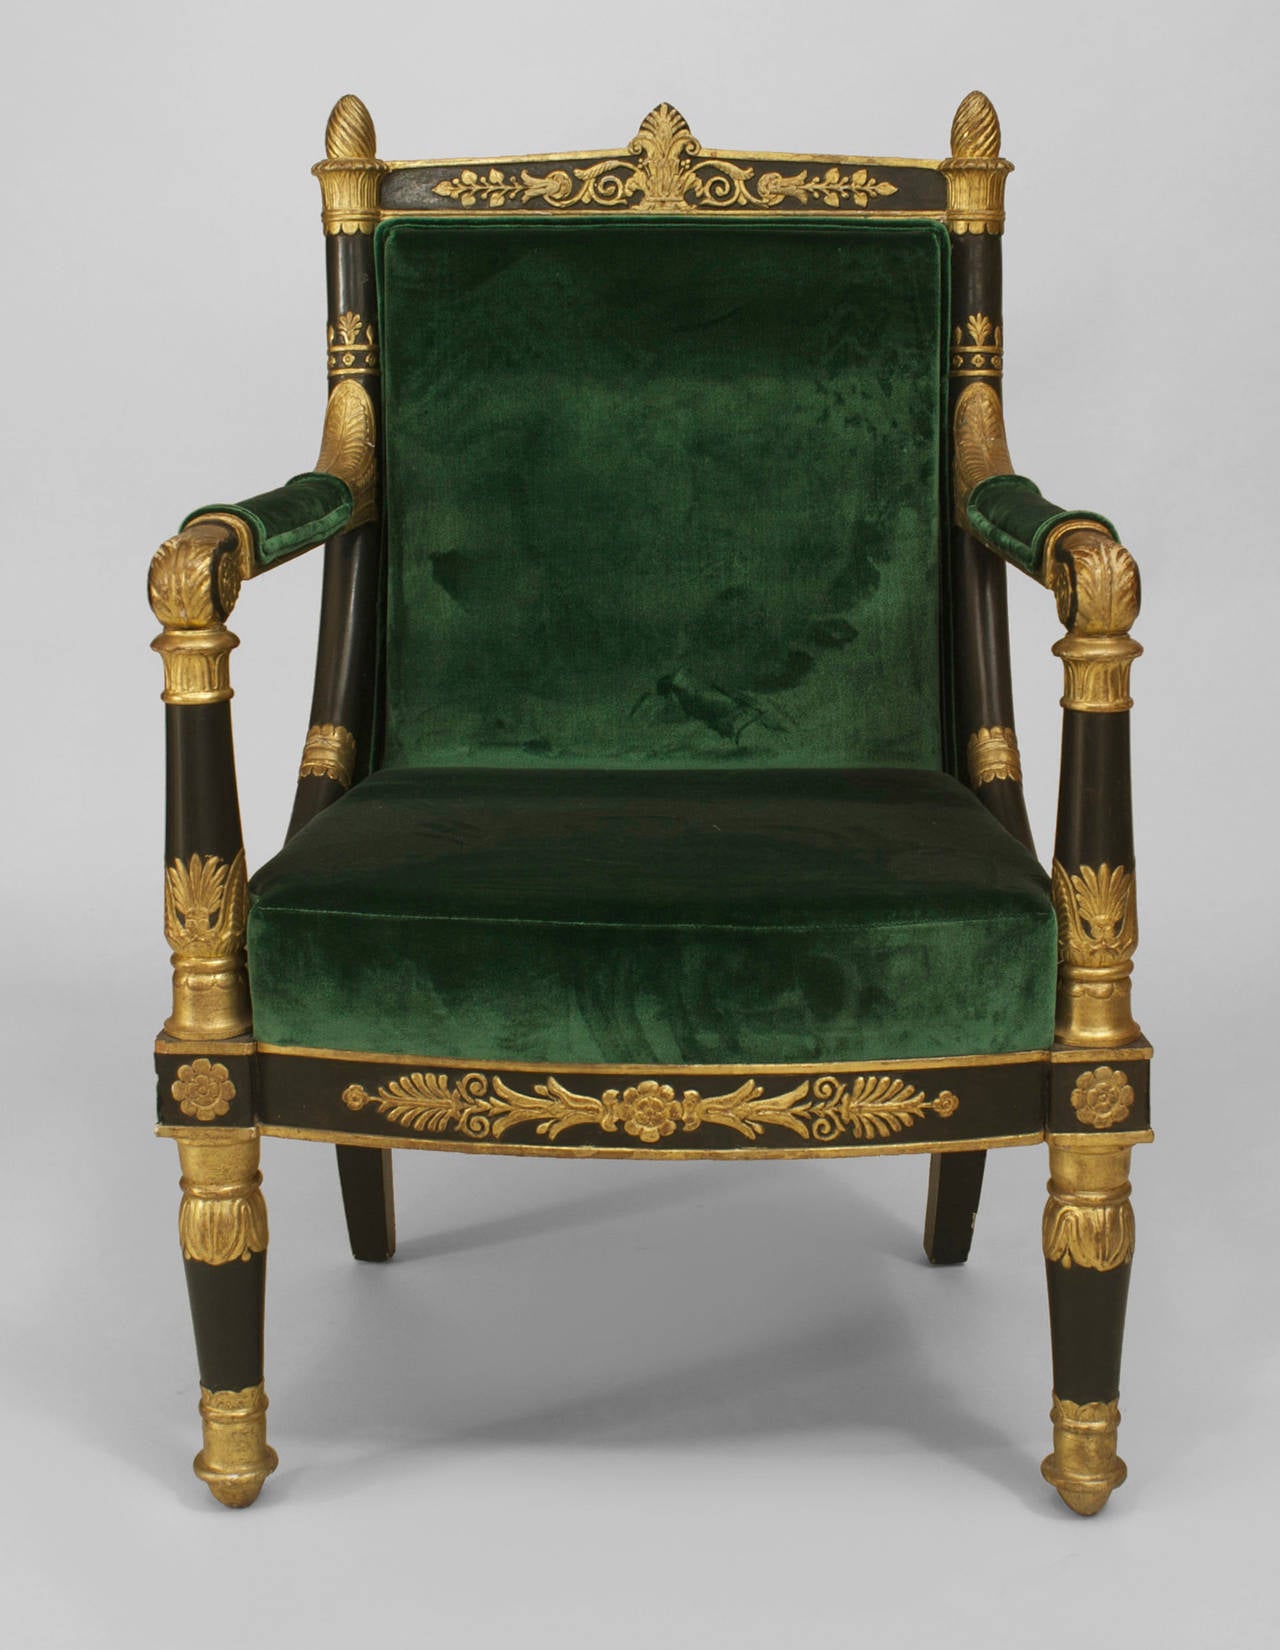 Wood Pair of Late 18th or Early 19th c. French Empire Gilt Carved Armchairs